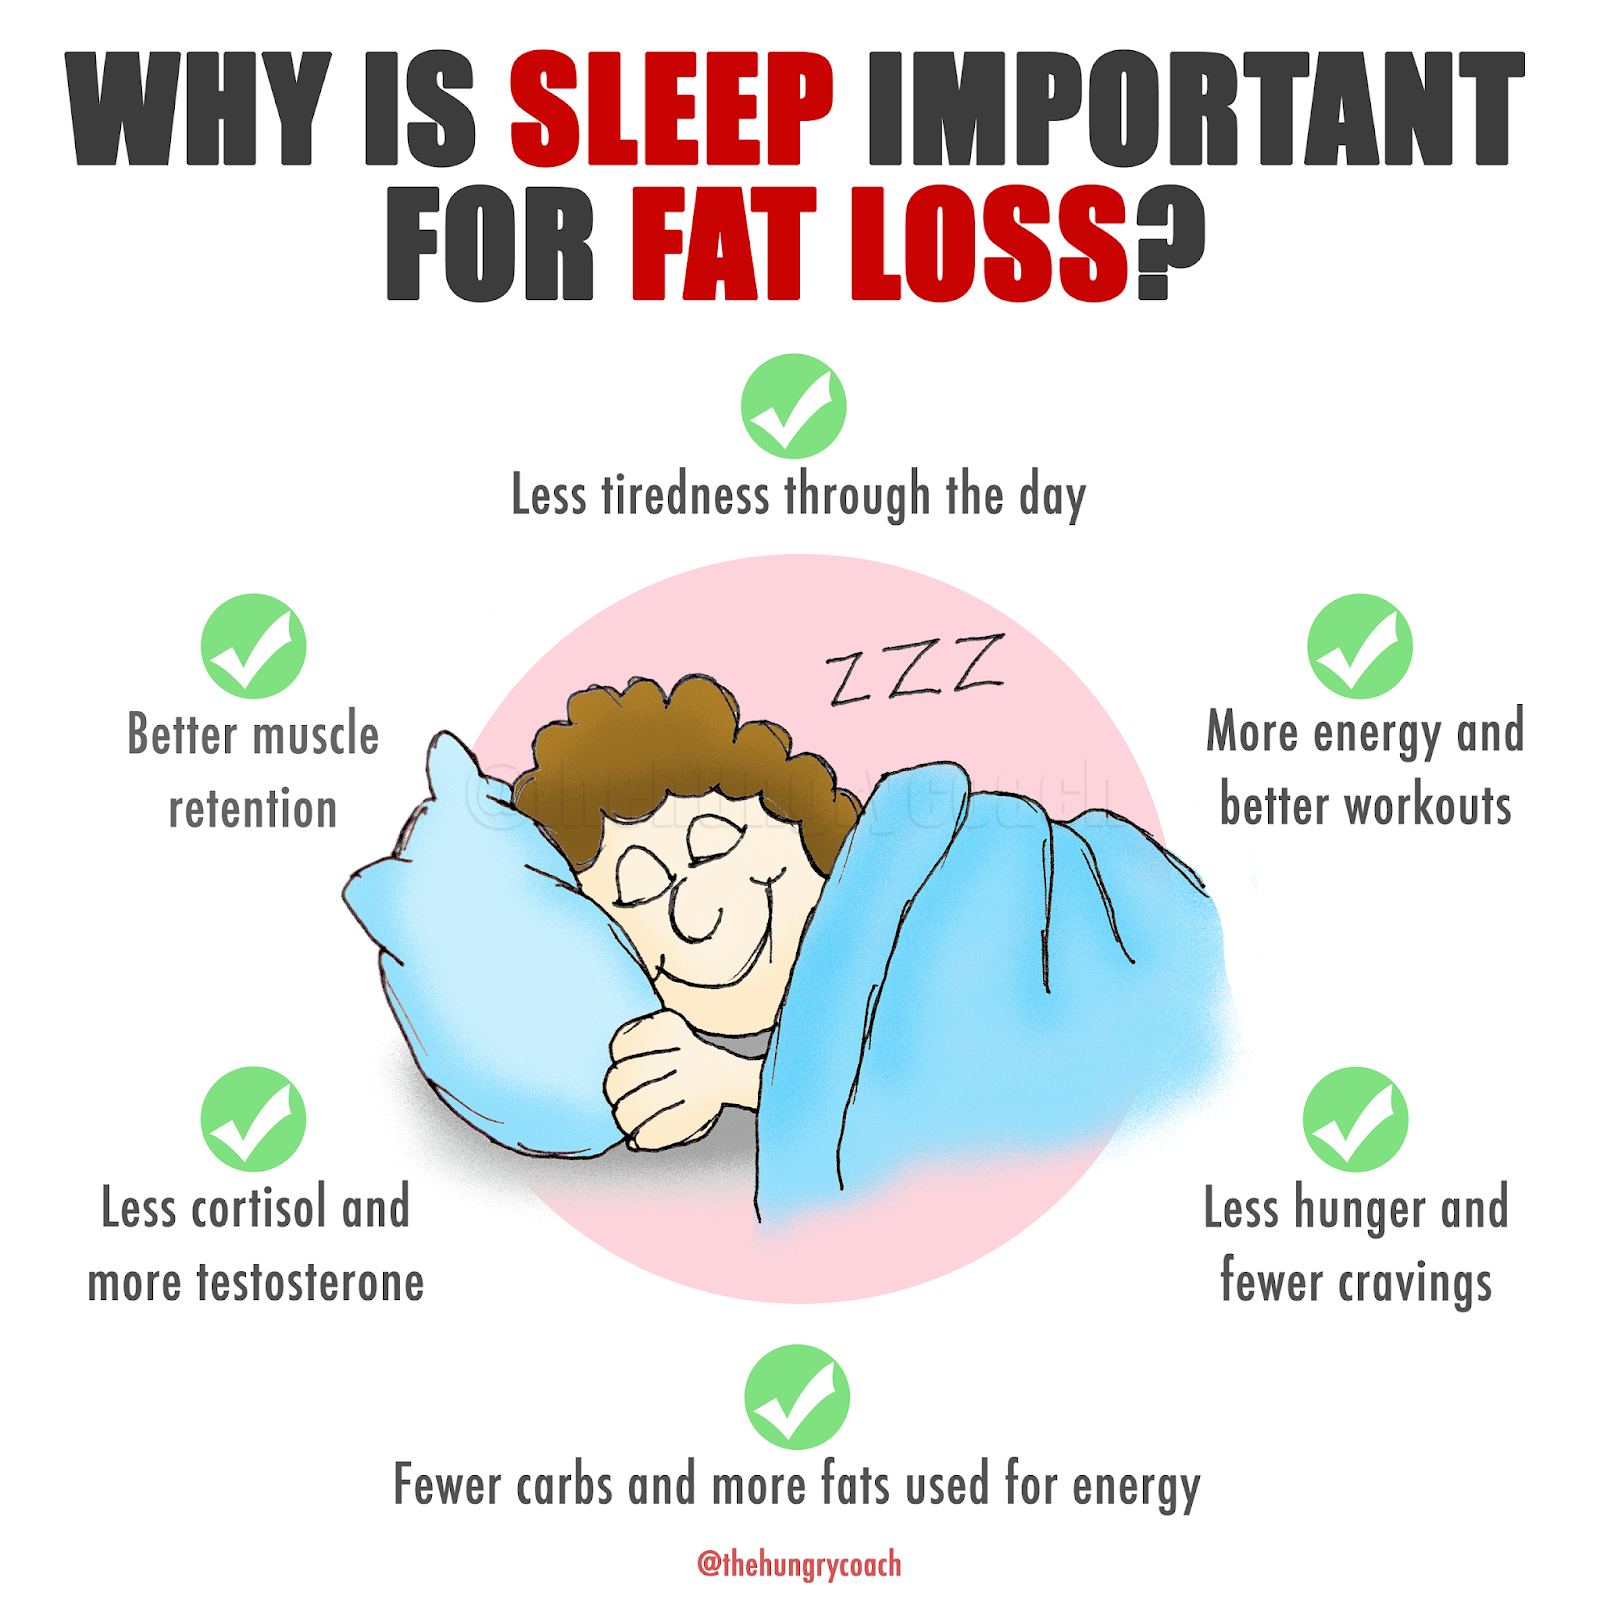 Why is sleep important for fat loss?